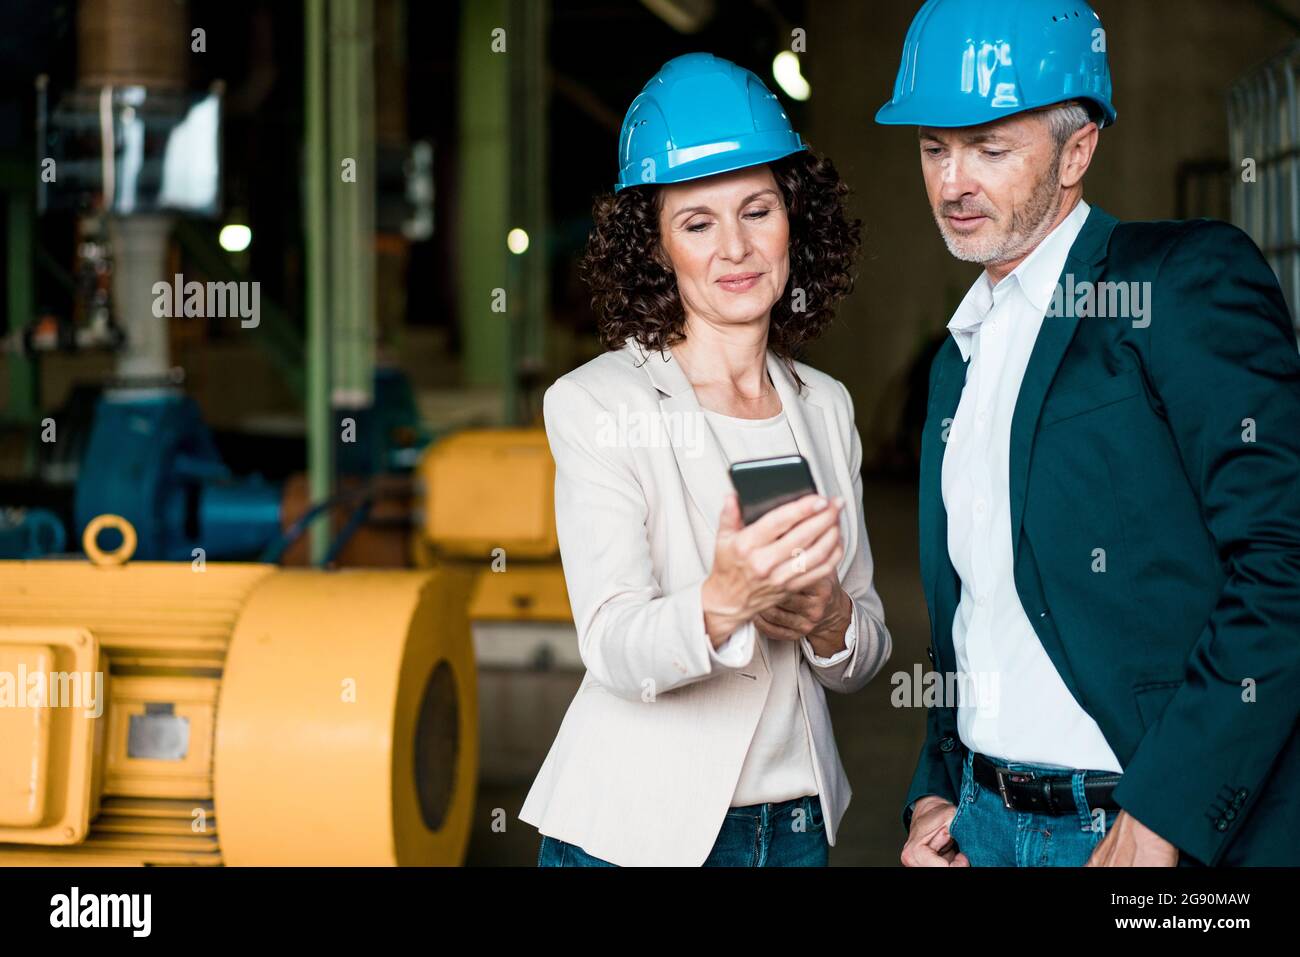 Inspector team with hardhat using mobile phone while standing in industry Stock Photo